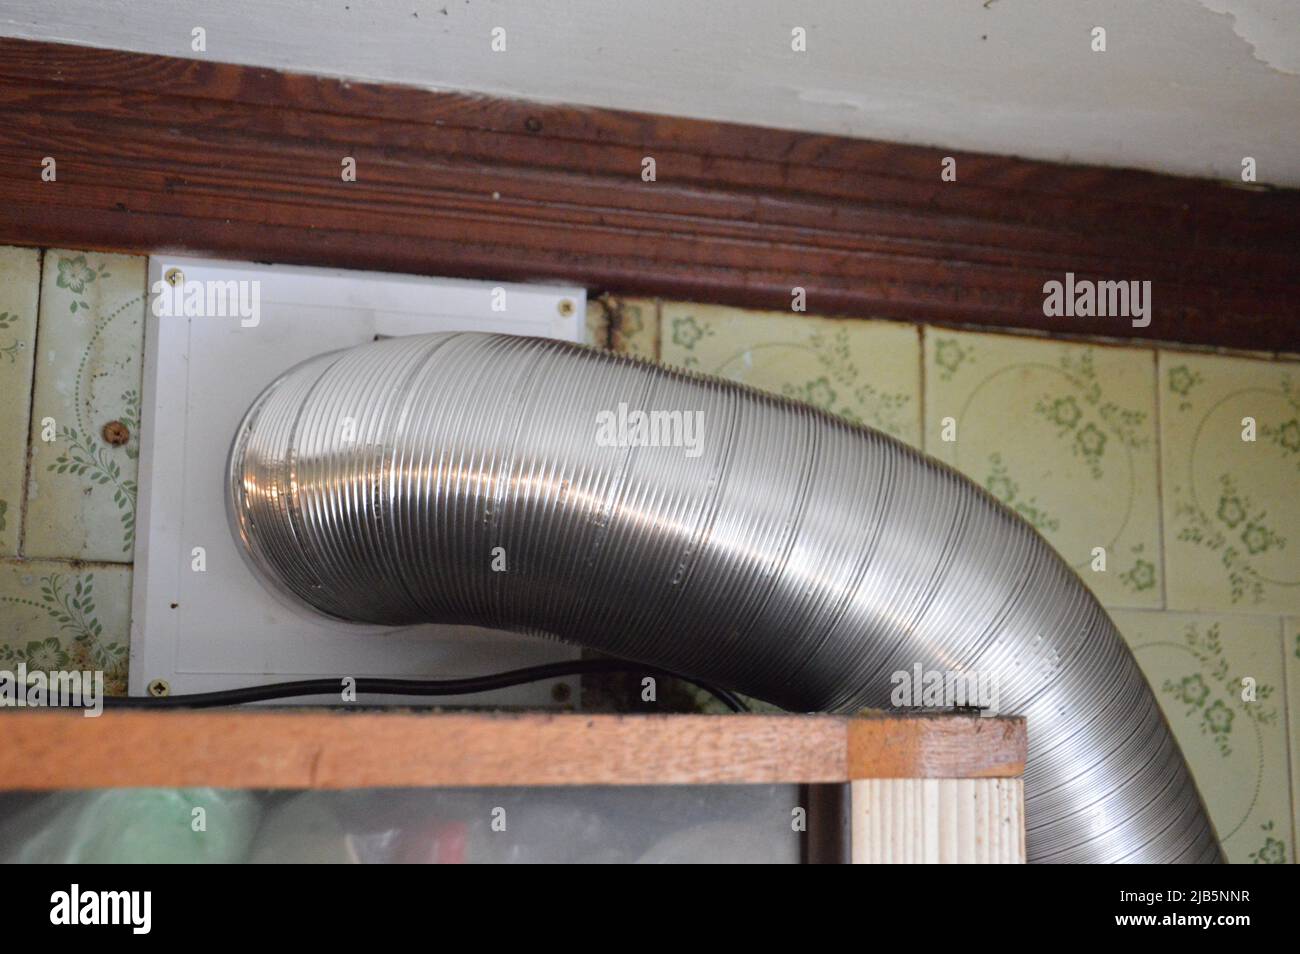 Installing a kitchen hood for the ventilation. Stock Photo